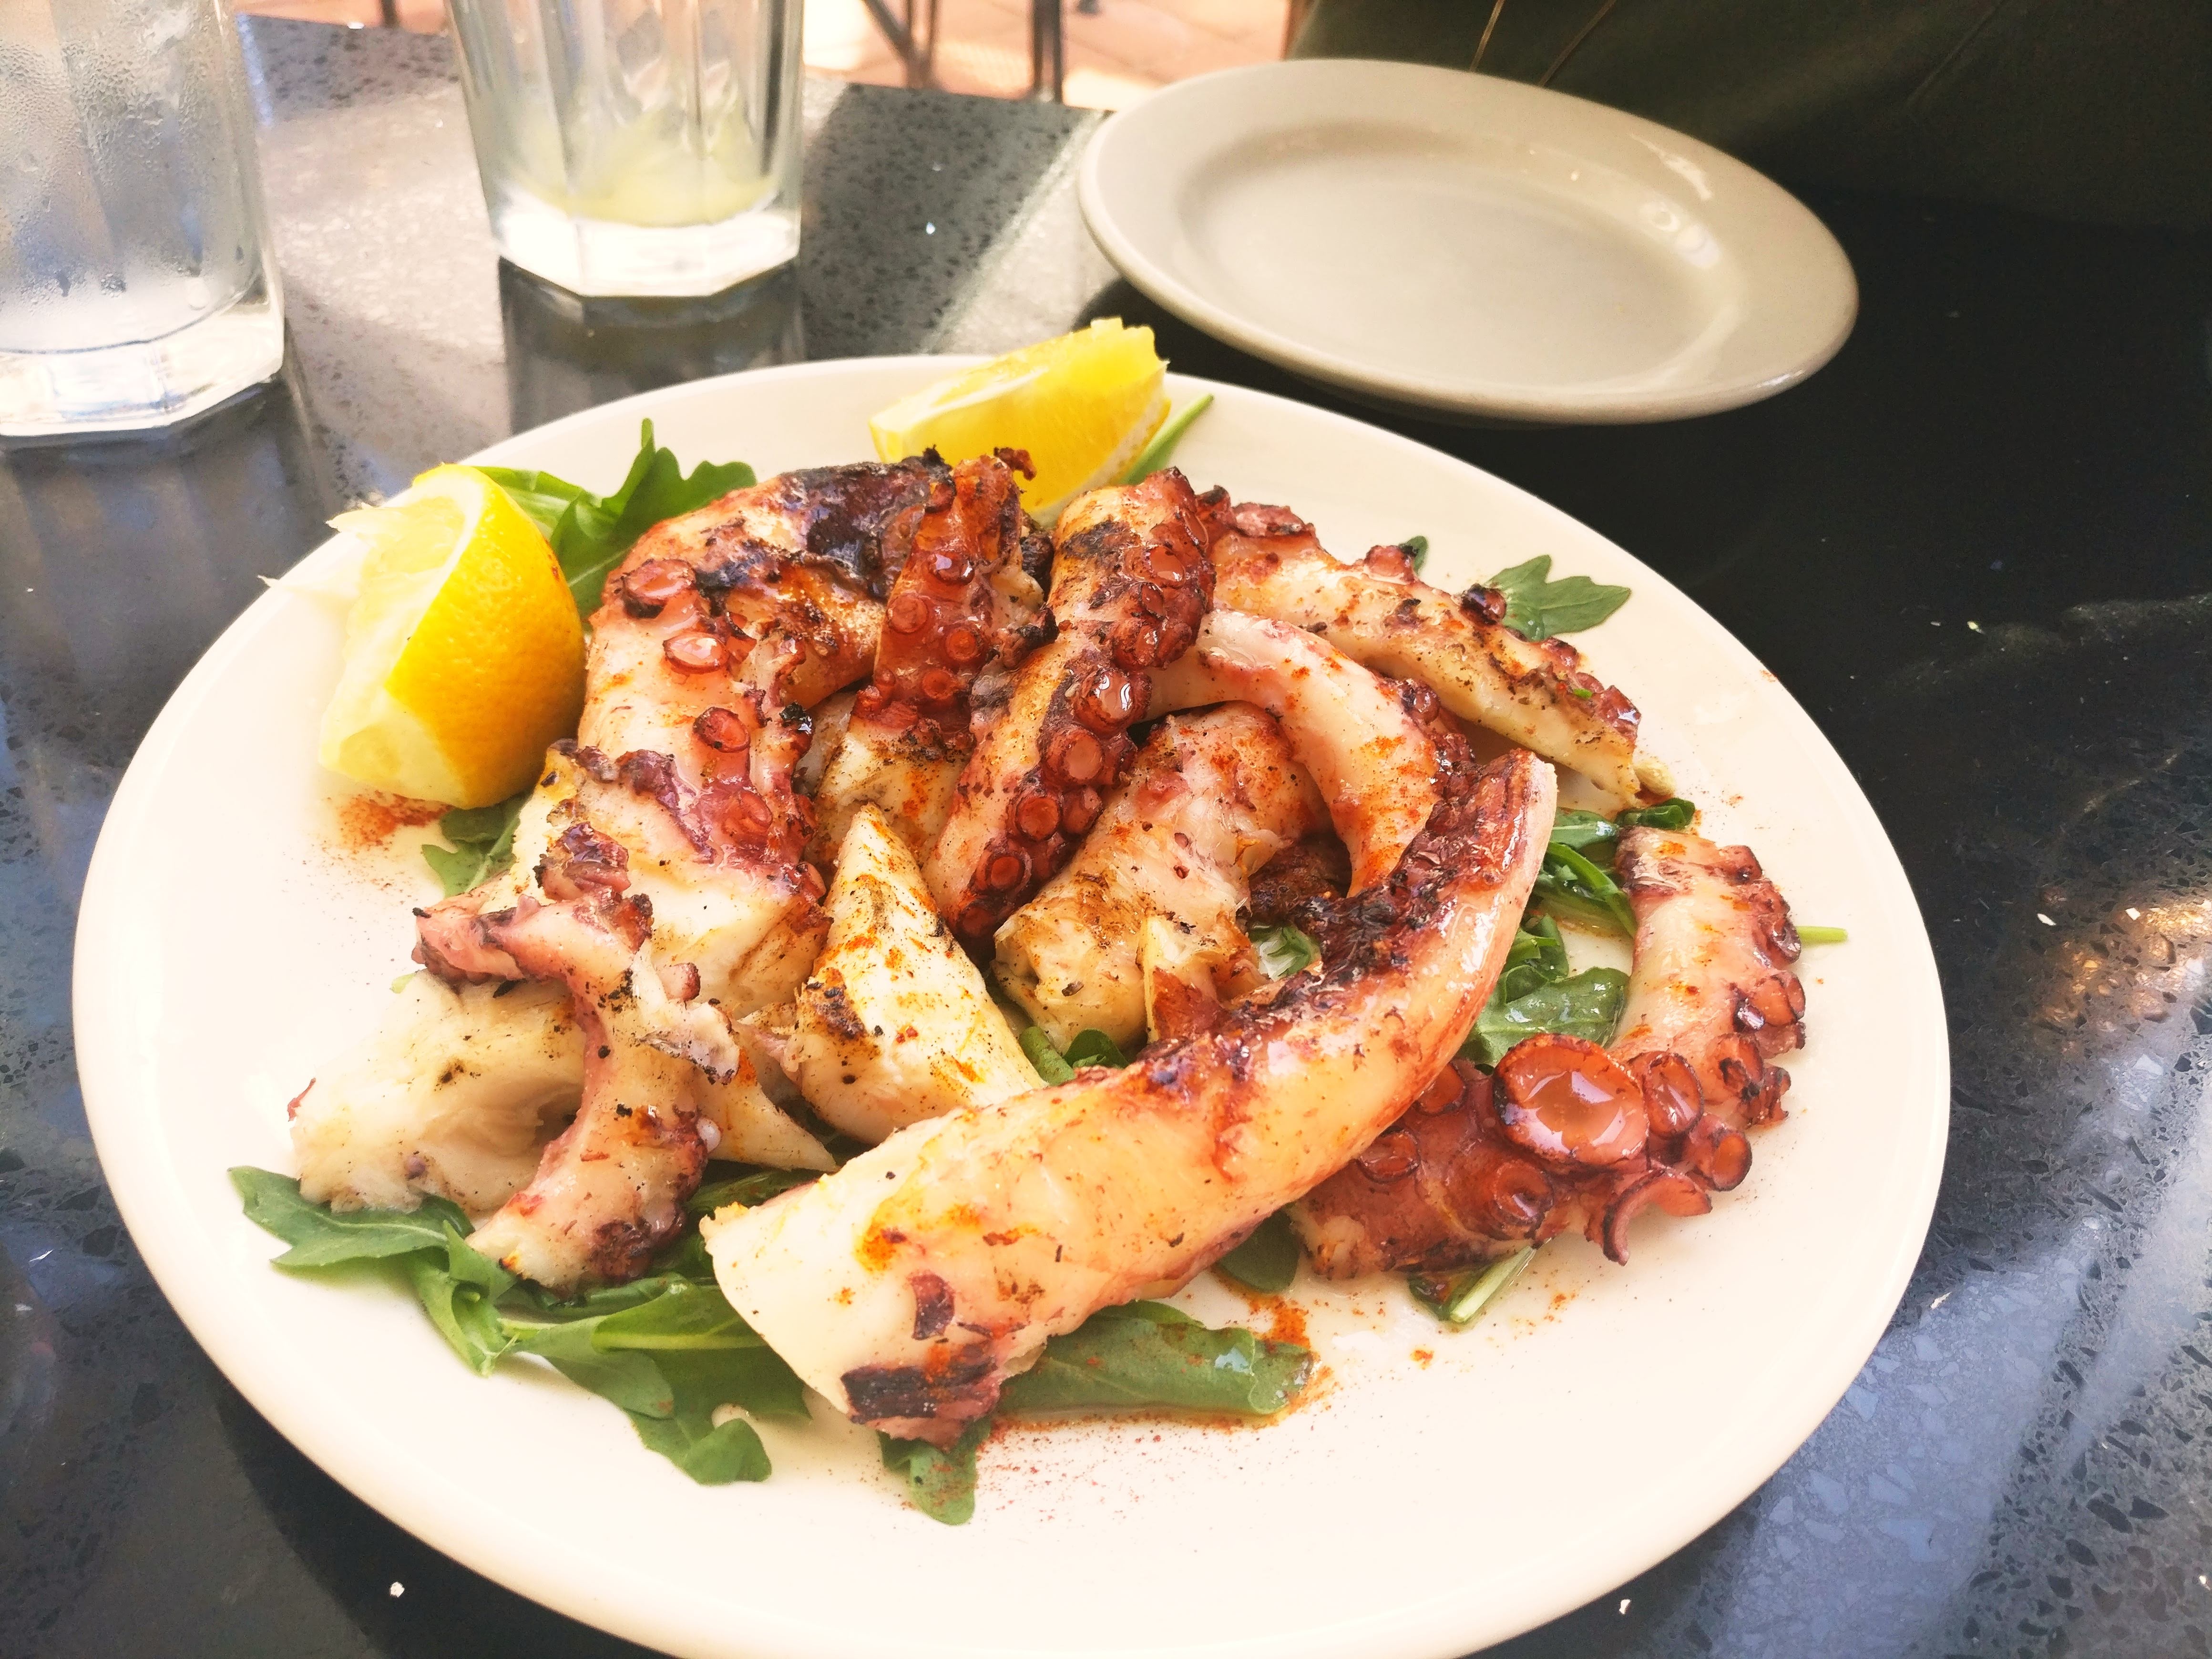 Grilled octopus tentacles on Roosevelt Island on a cheap day trip from Manhattan by ferry.